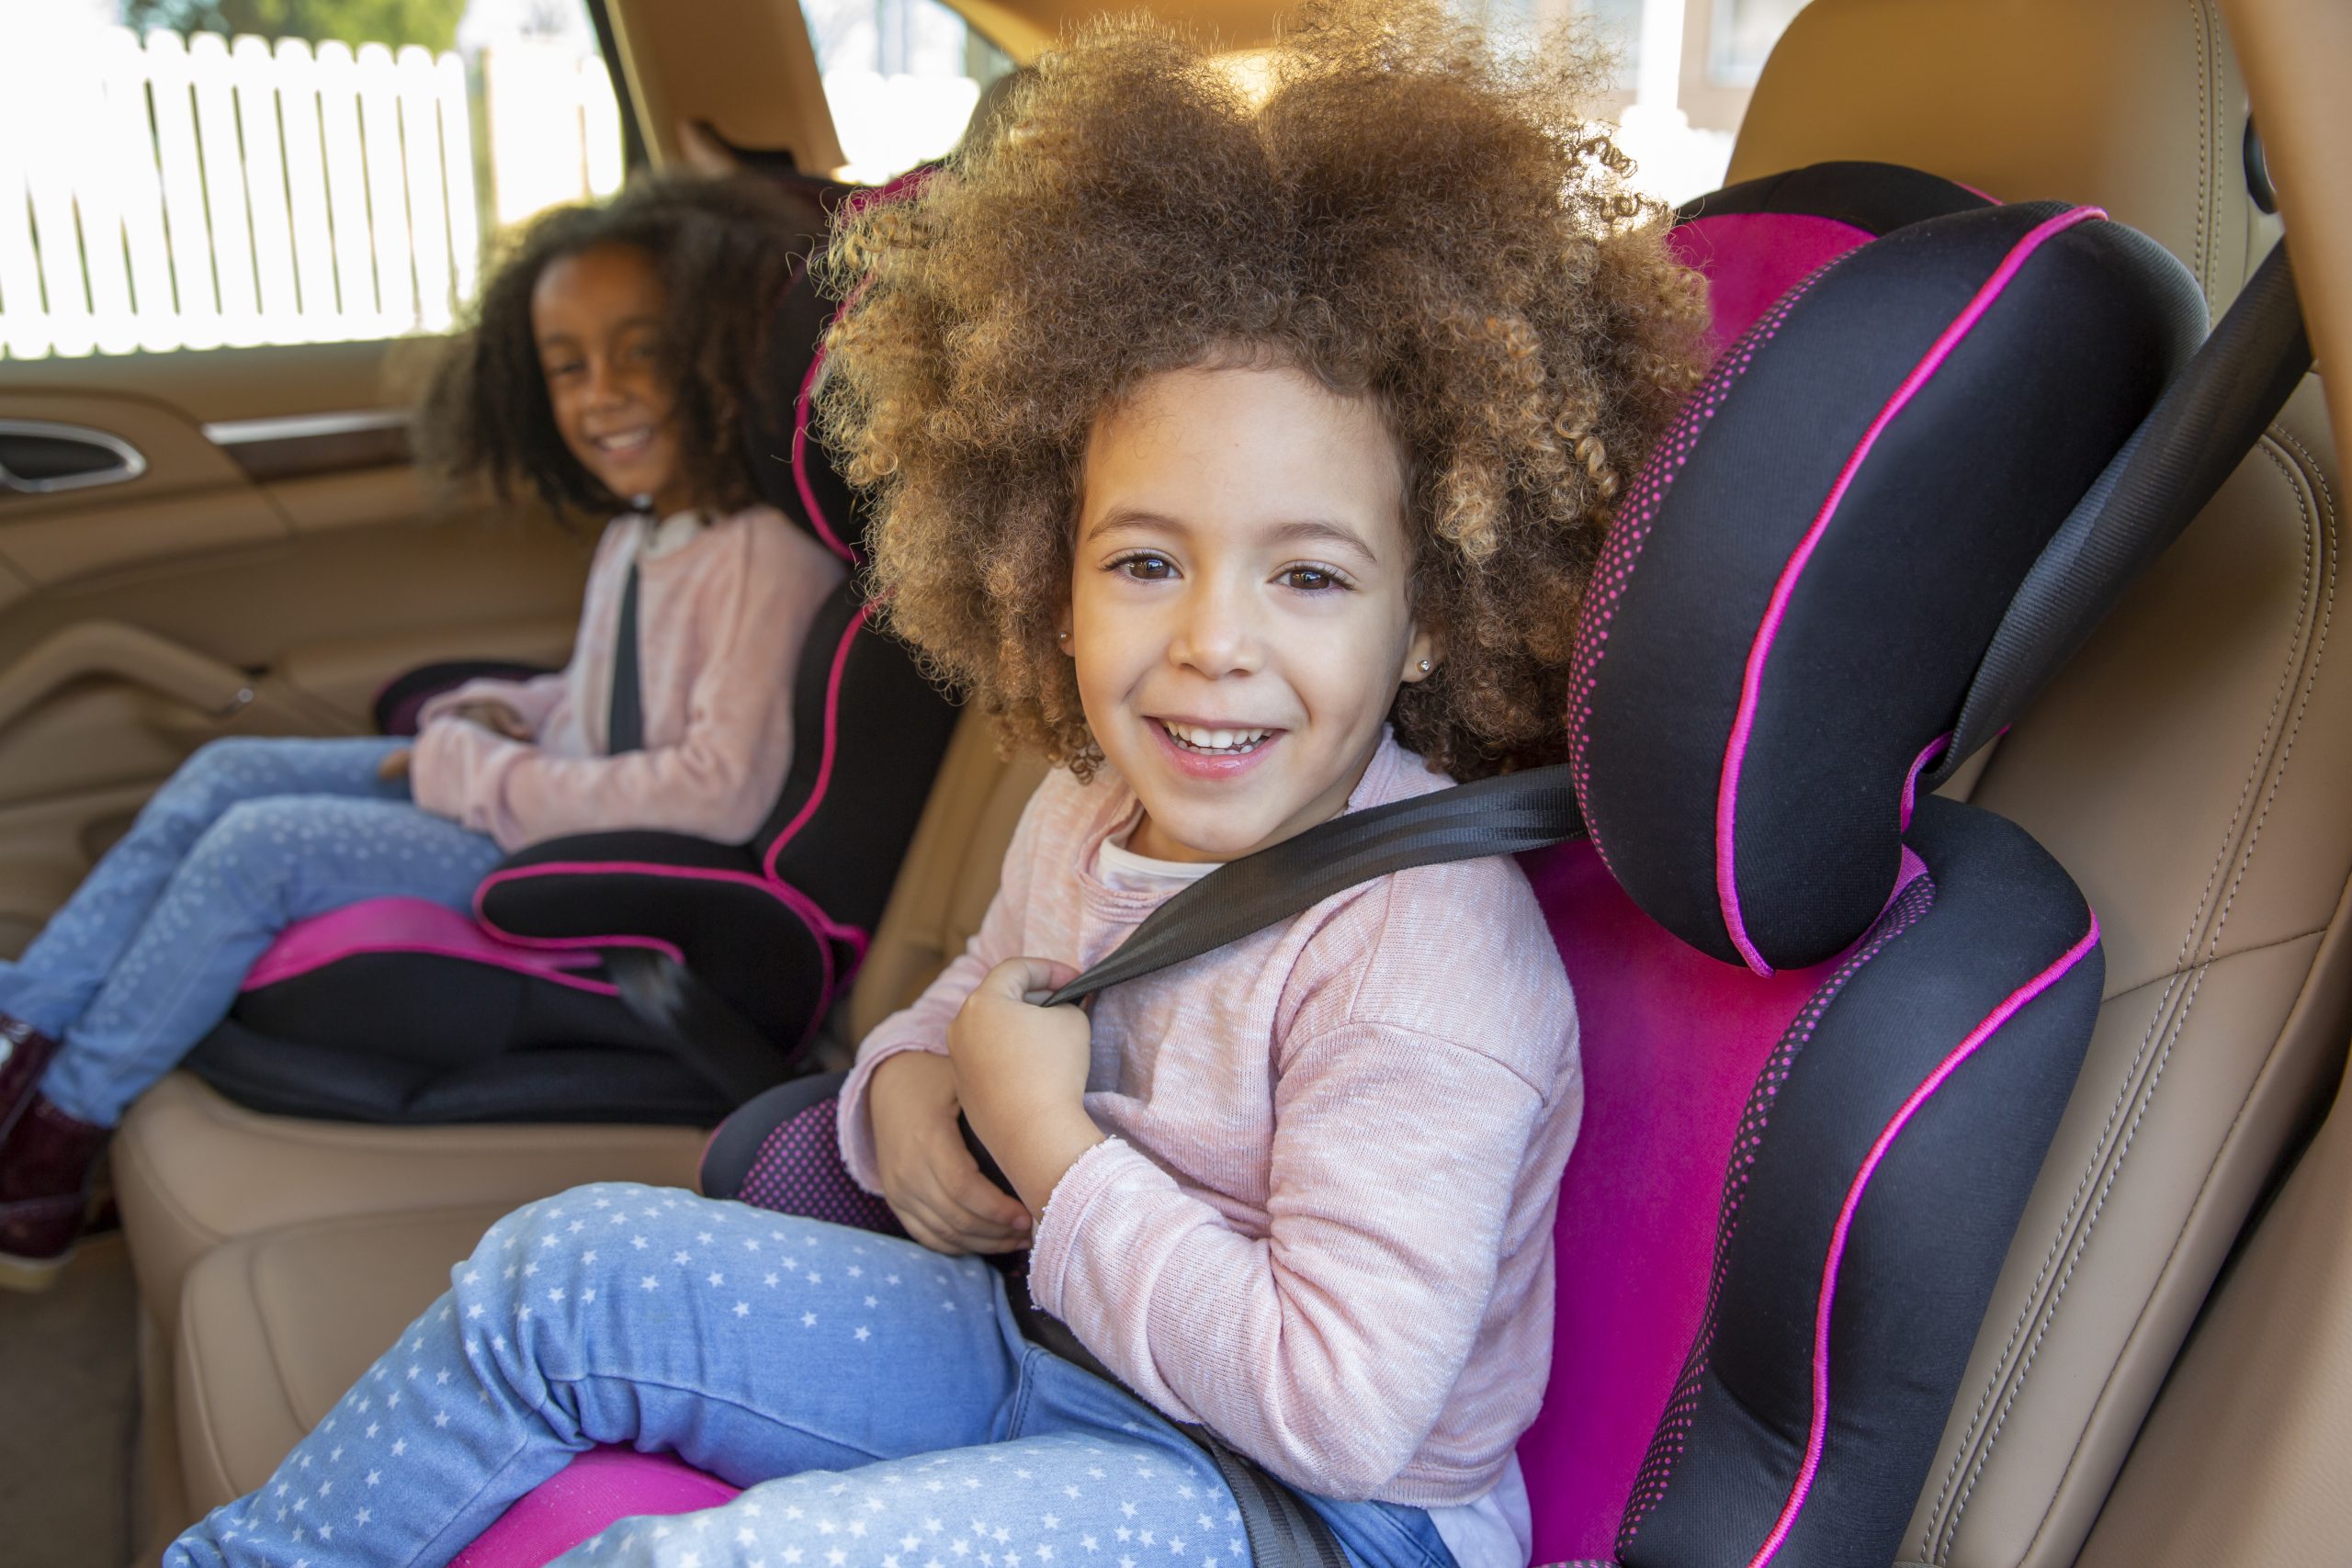 Ethnic kid sister girls in car back seat with safety belts happy smiling